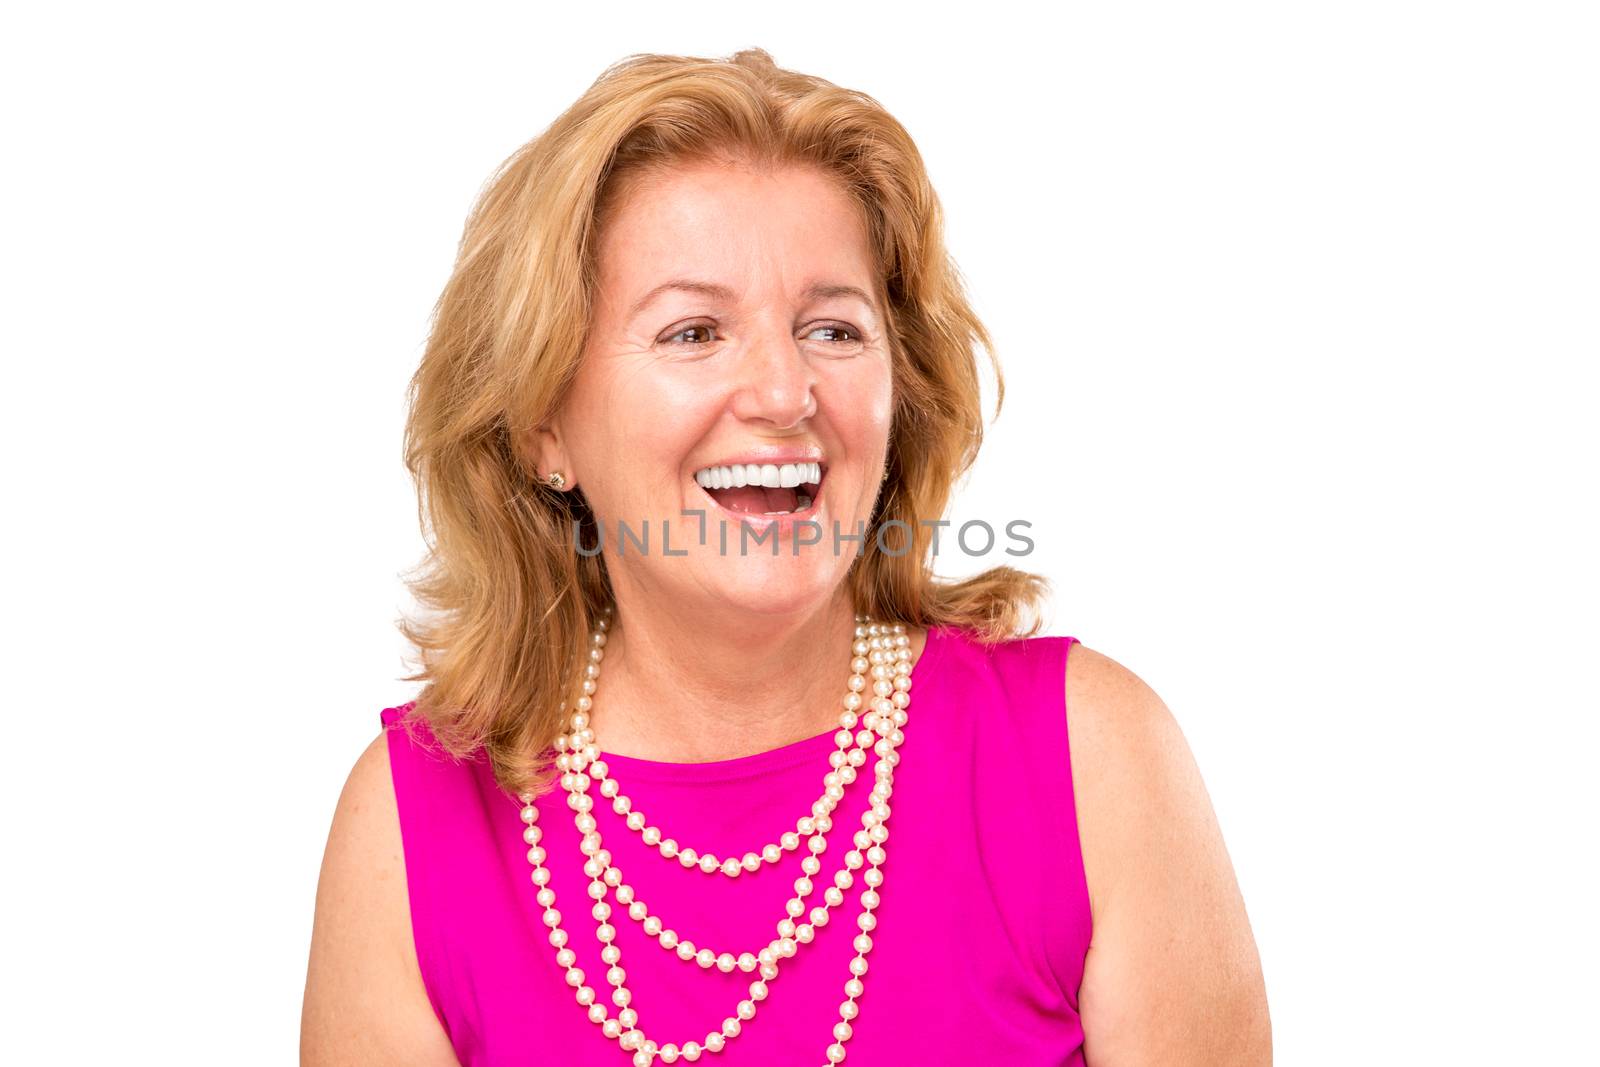 Mature Blonde Lady with large smile, she is wearing catchy pink shirt and pearl necklace